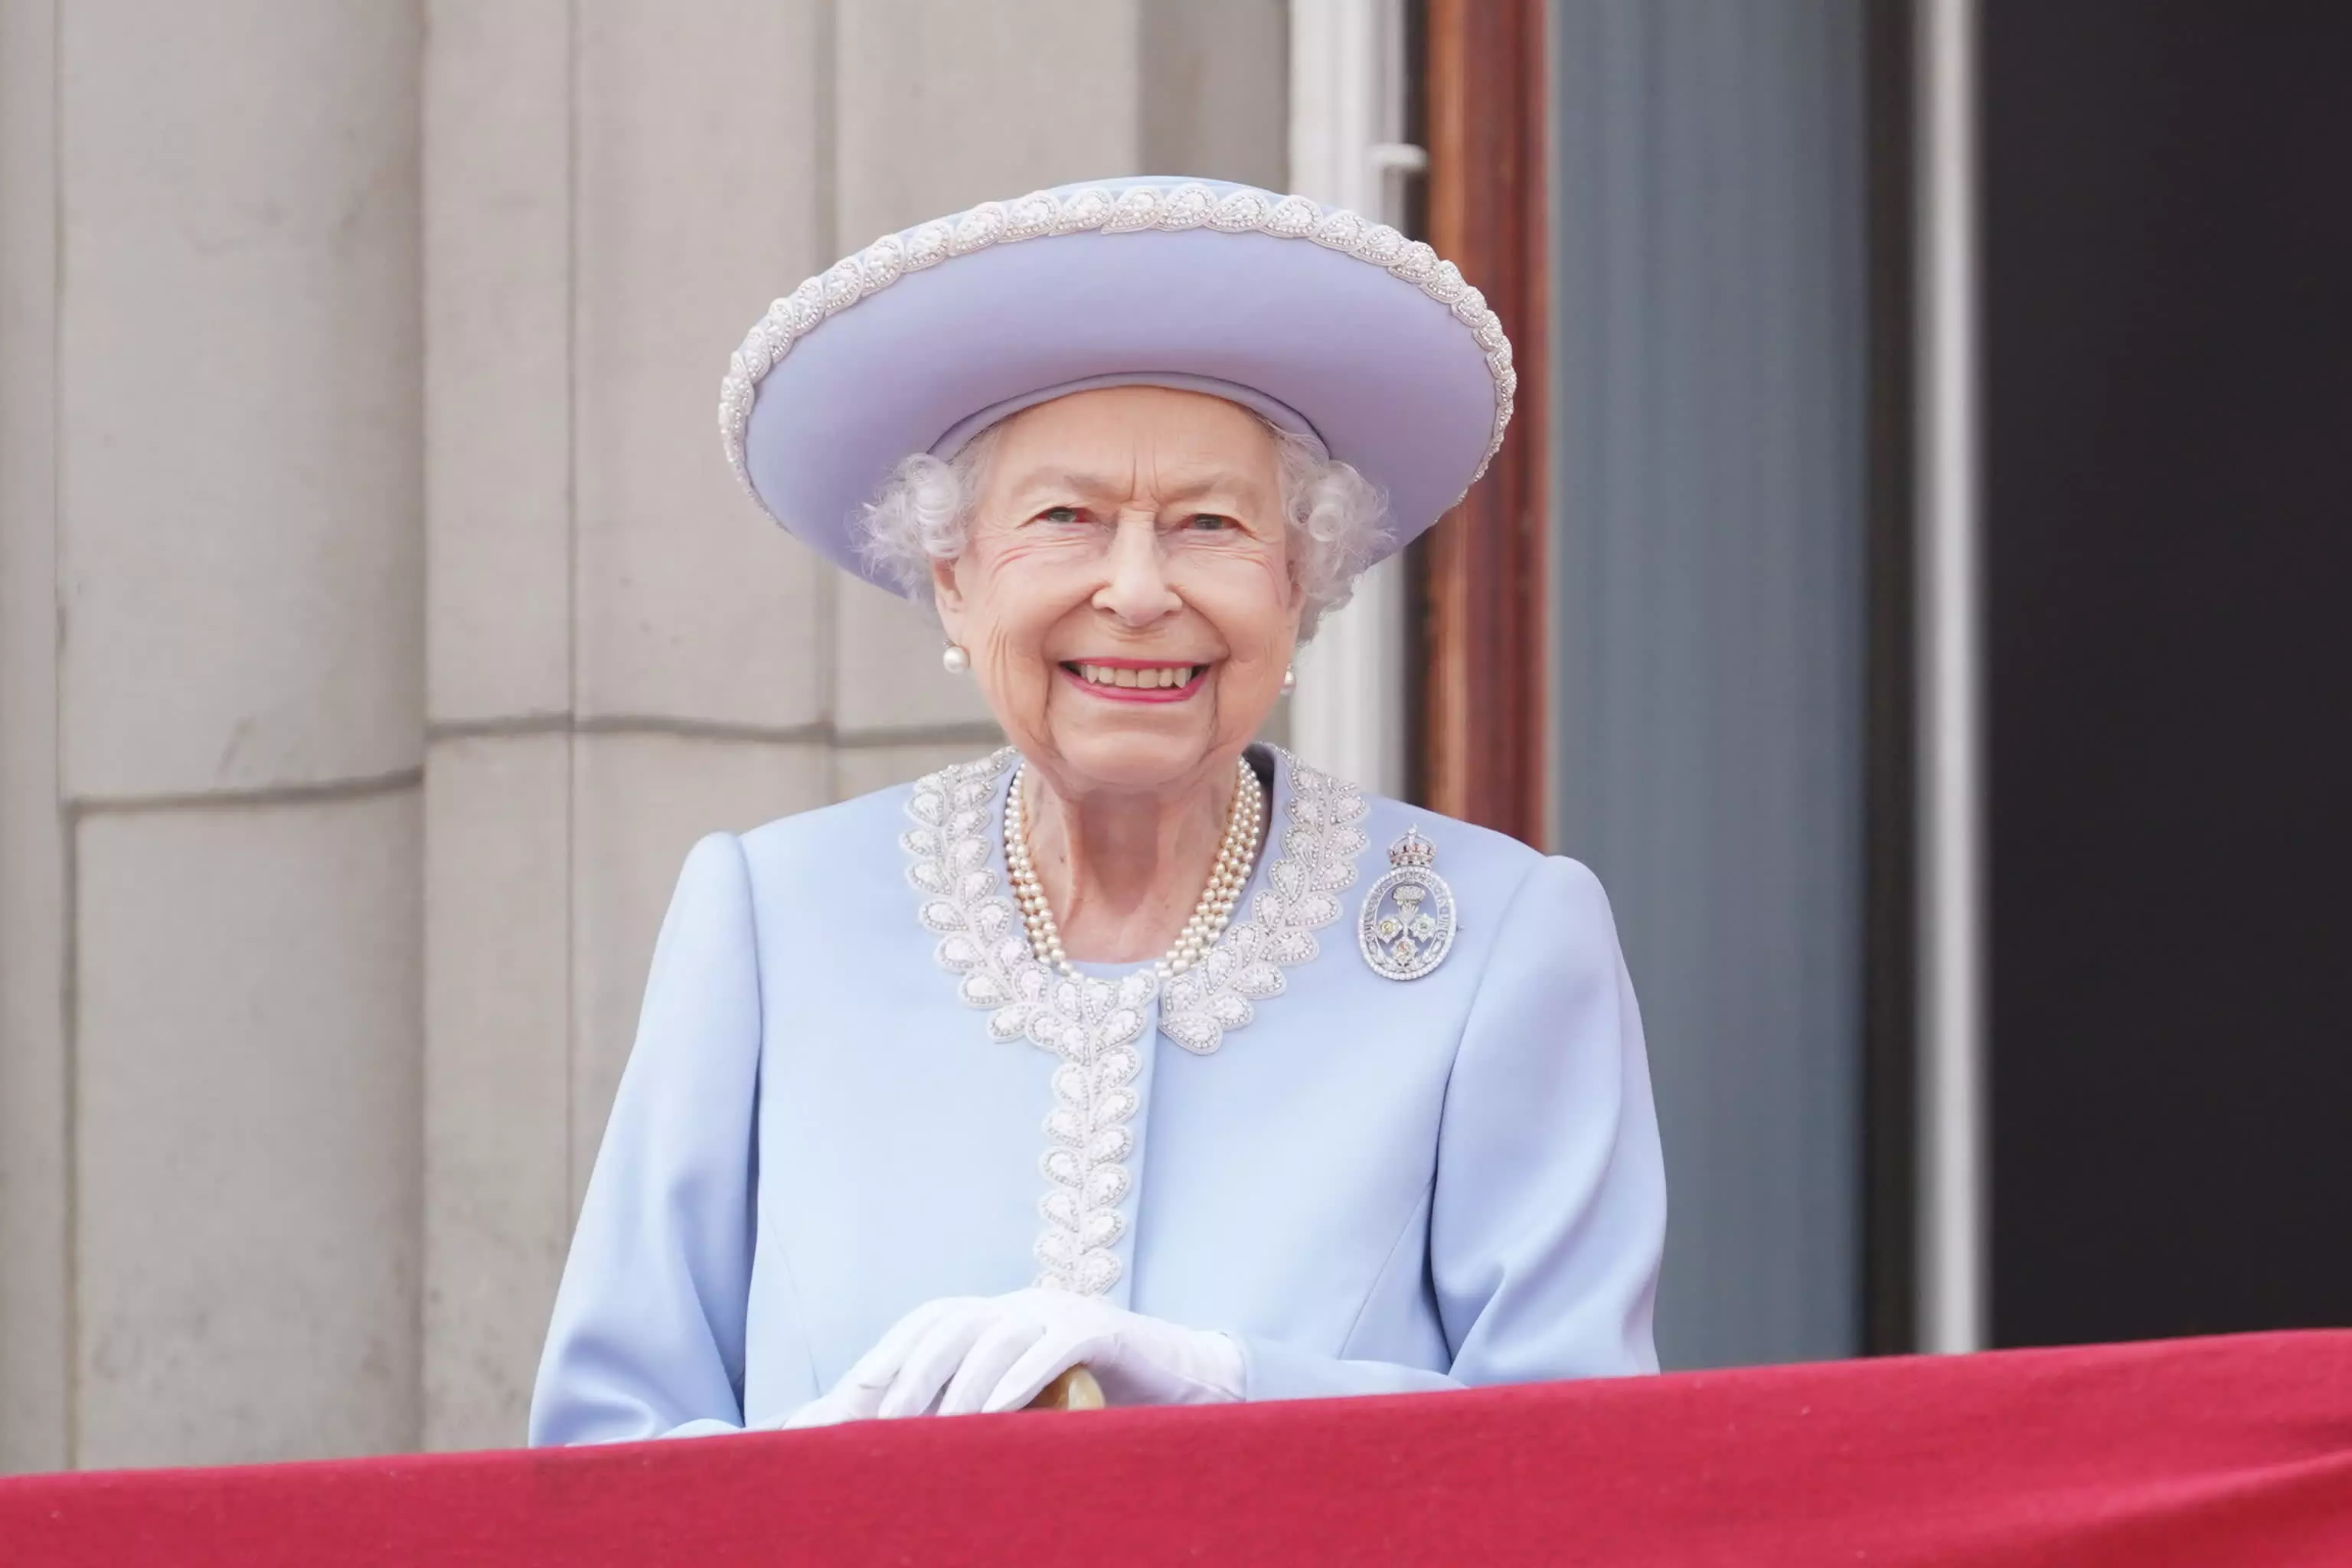 96-year-old Queen Elizabeth II becomes the second-longest reigning monarch in the world